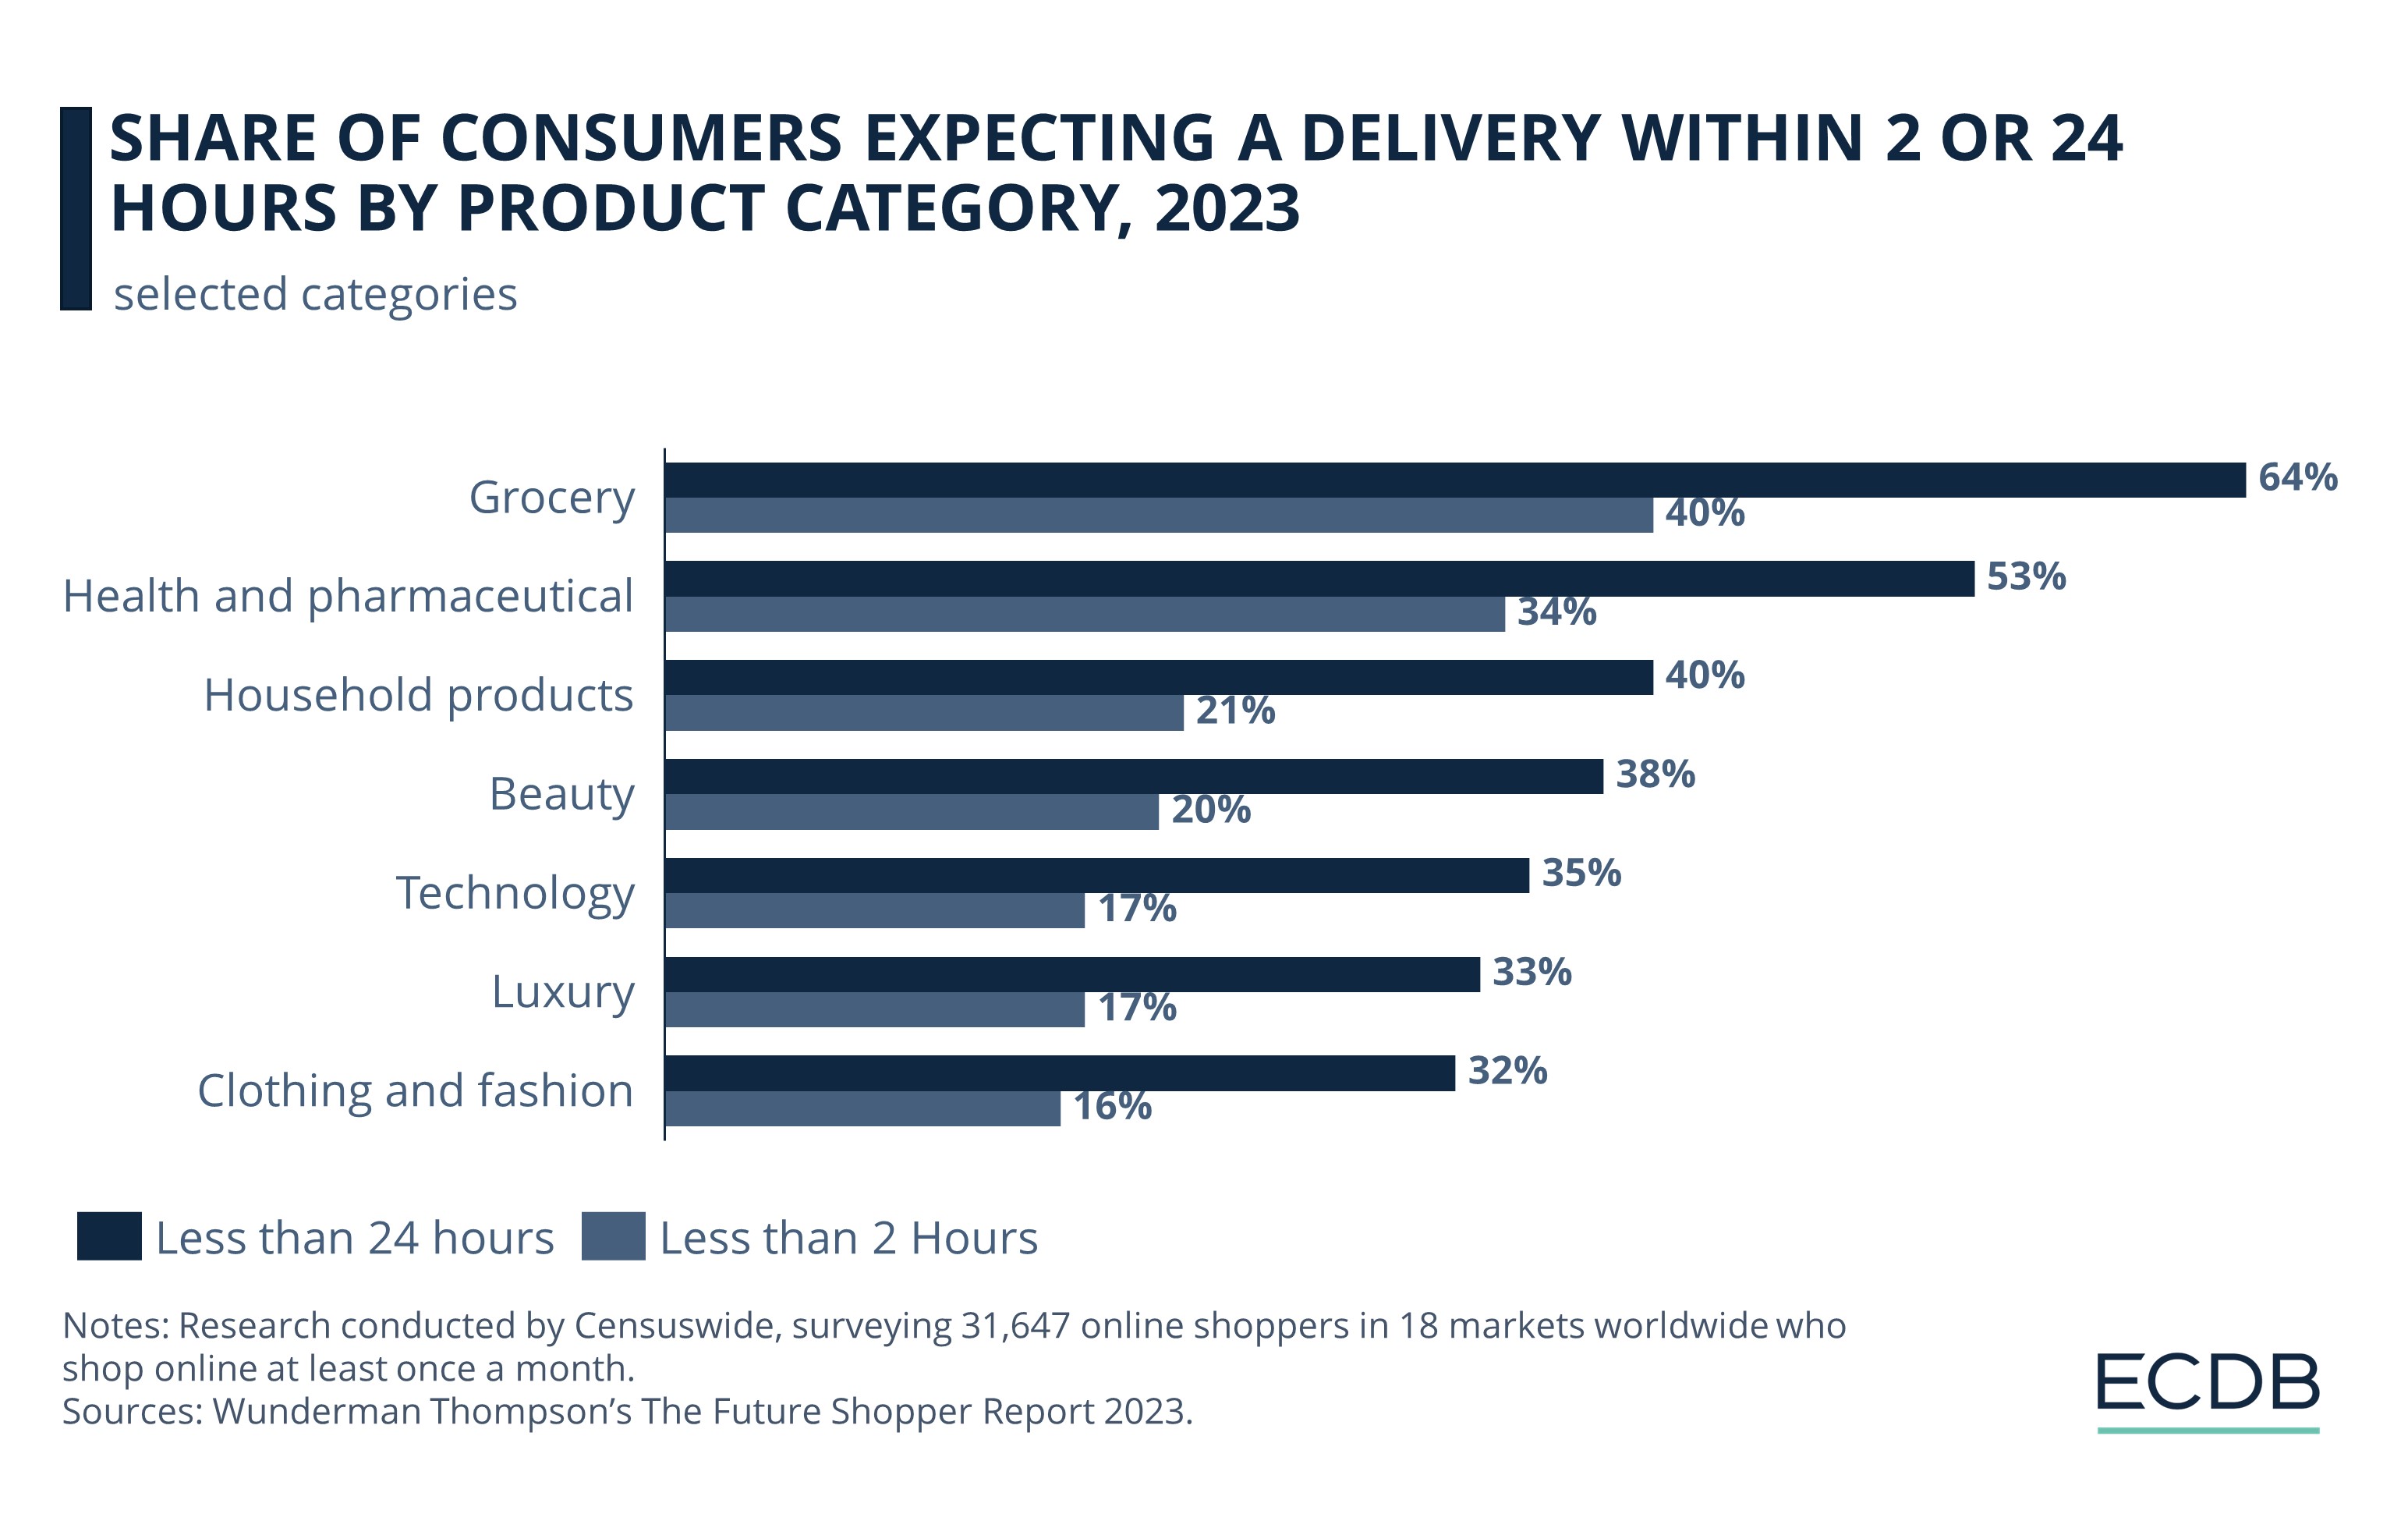 Share of Consumers Expecting a Delivery within 2 or 24 Hours by Product Category, 2023